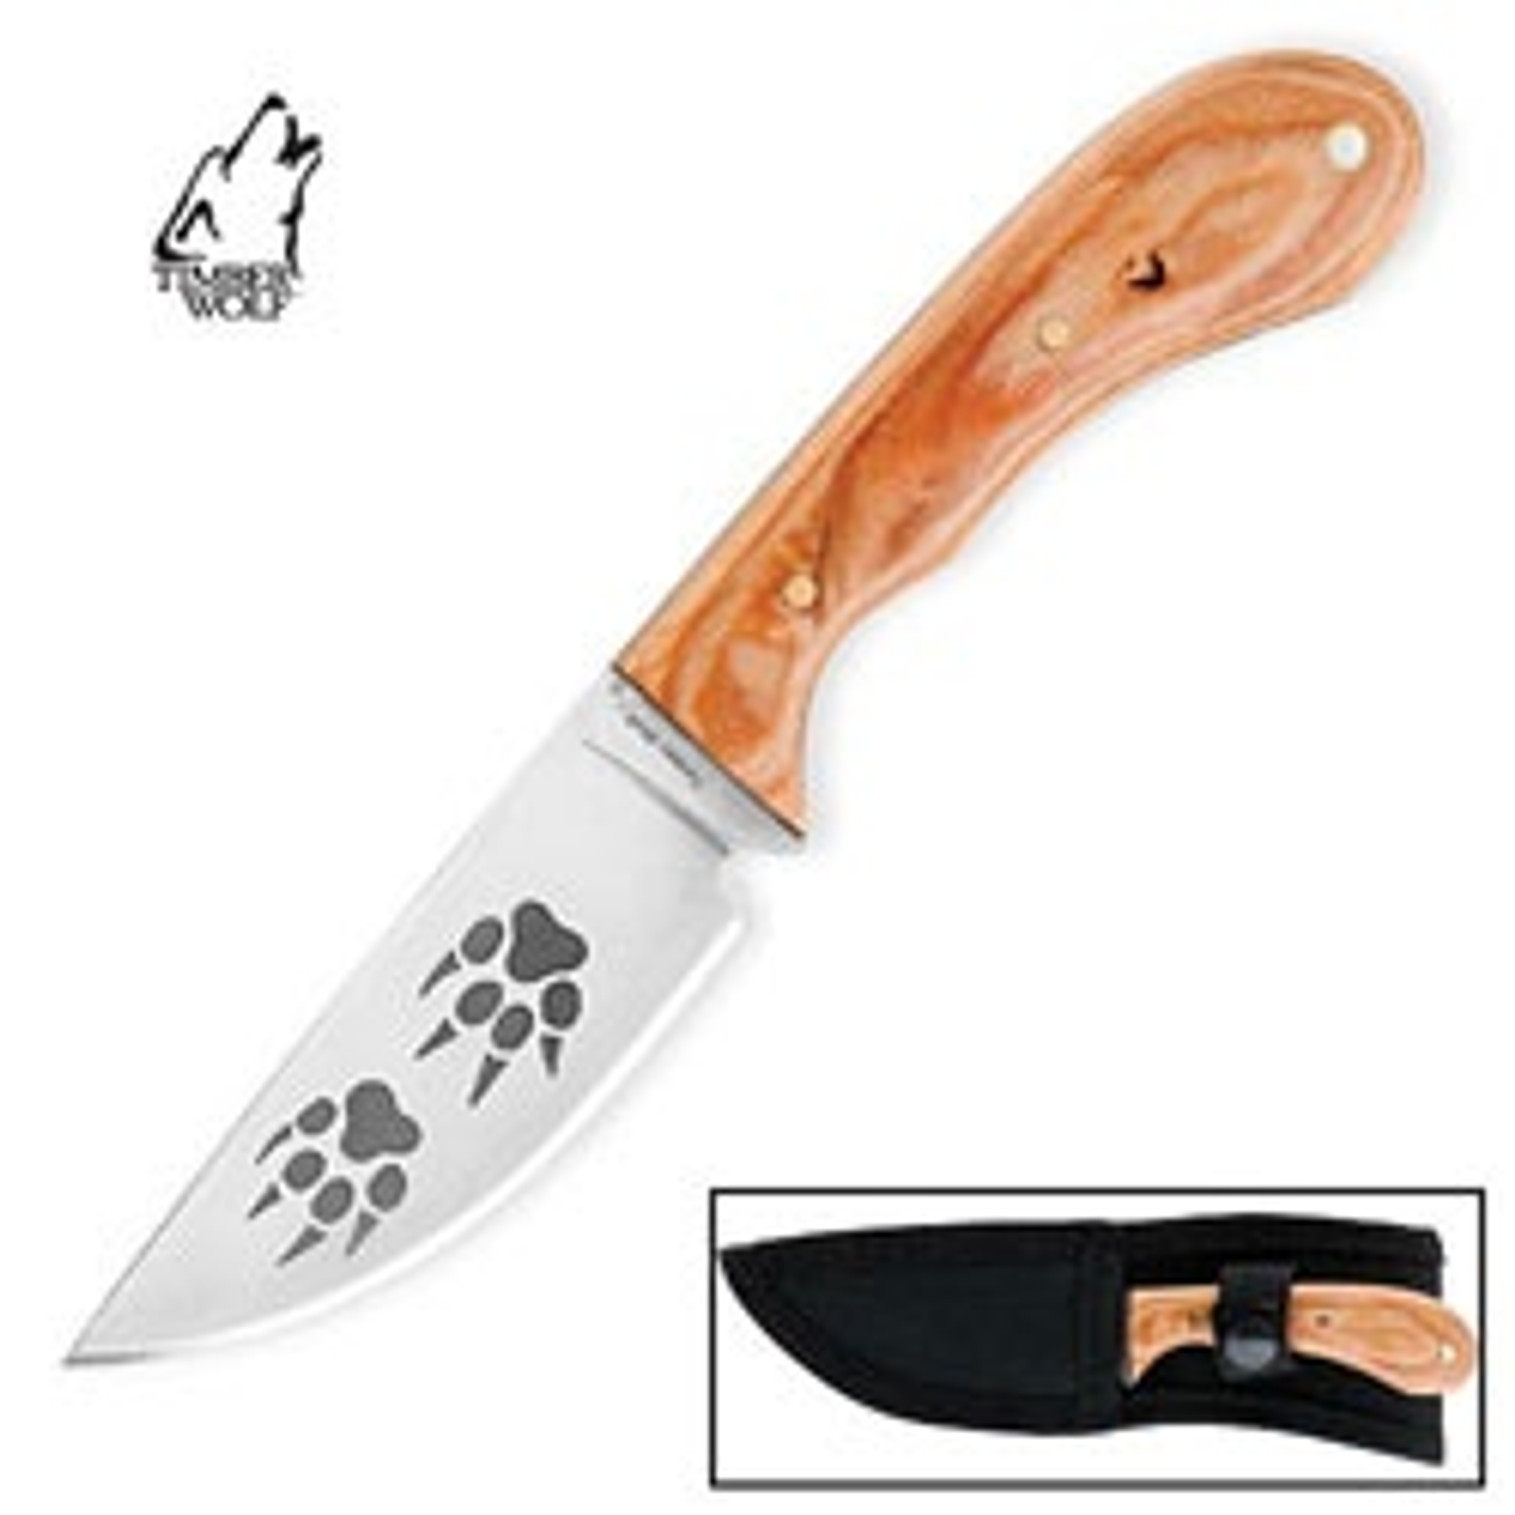 Timber Wolf Bear Tracker Wood Bowie Knife